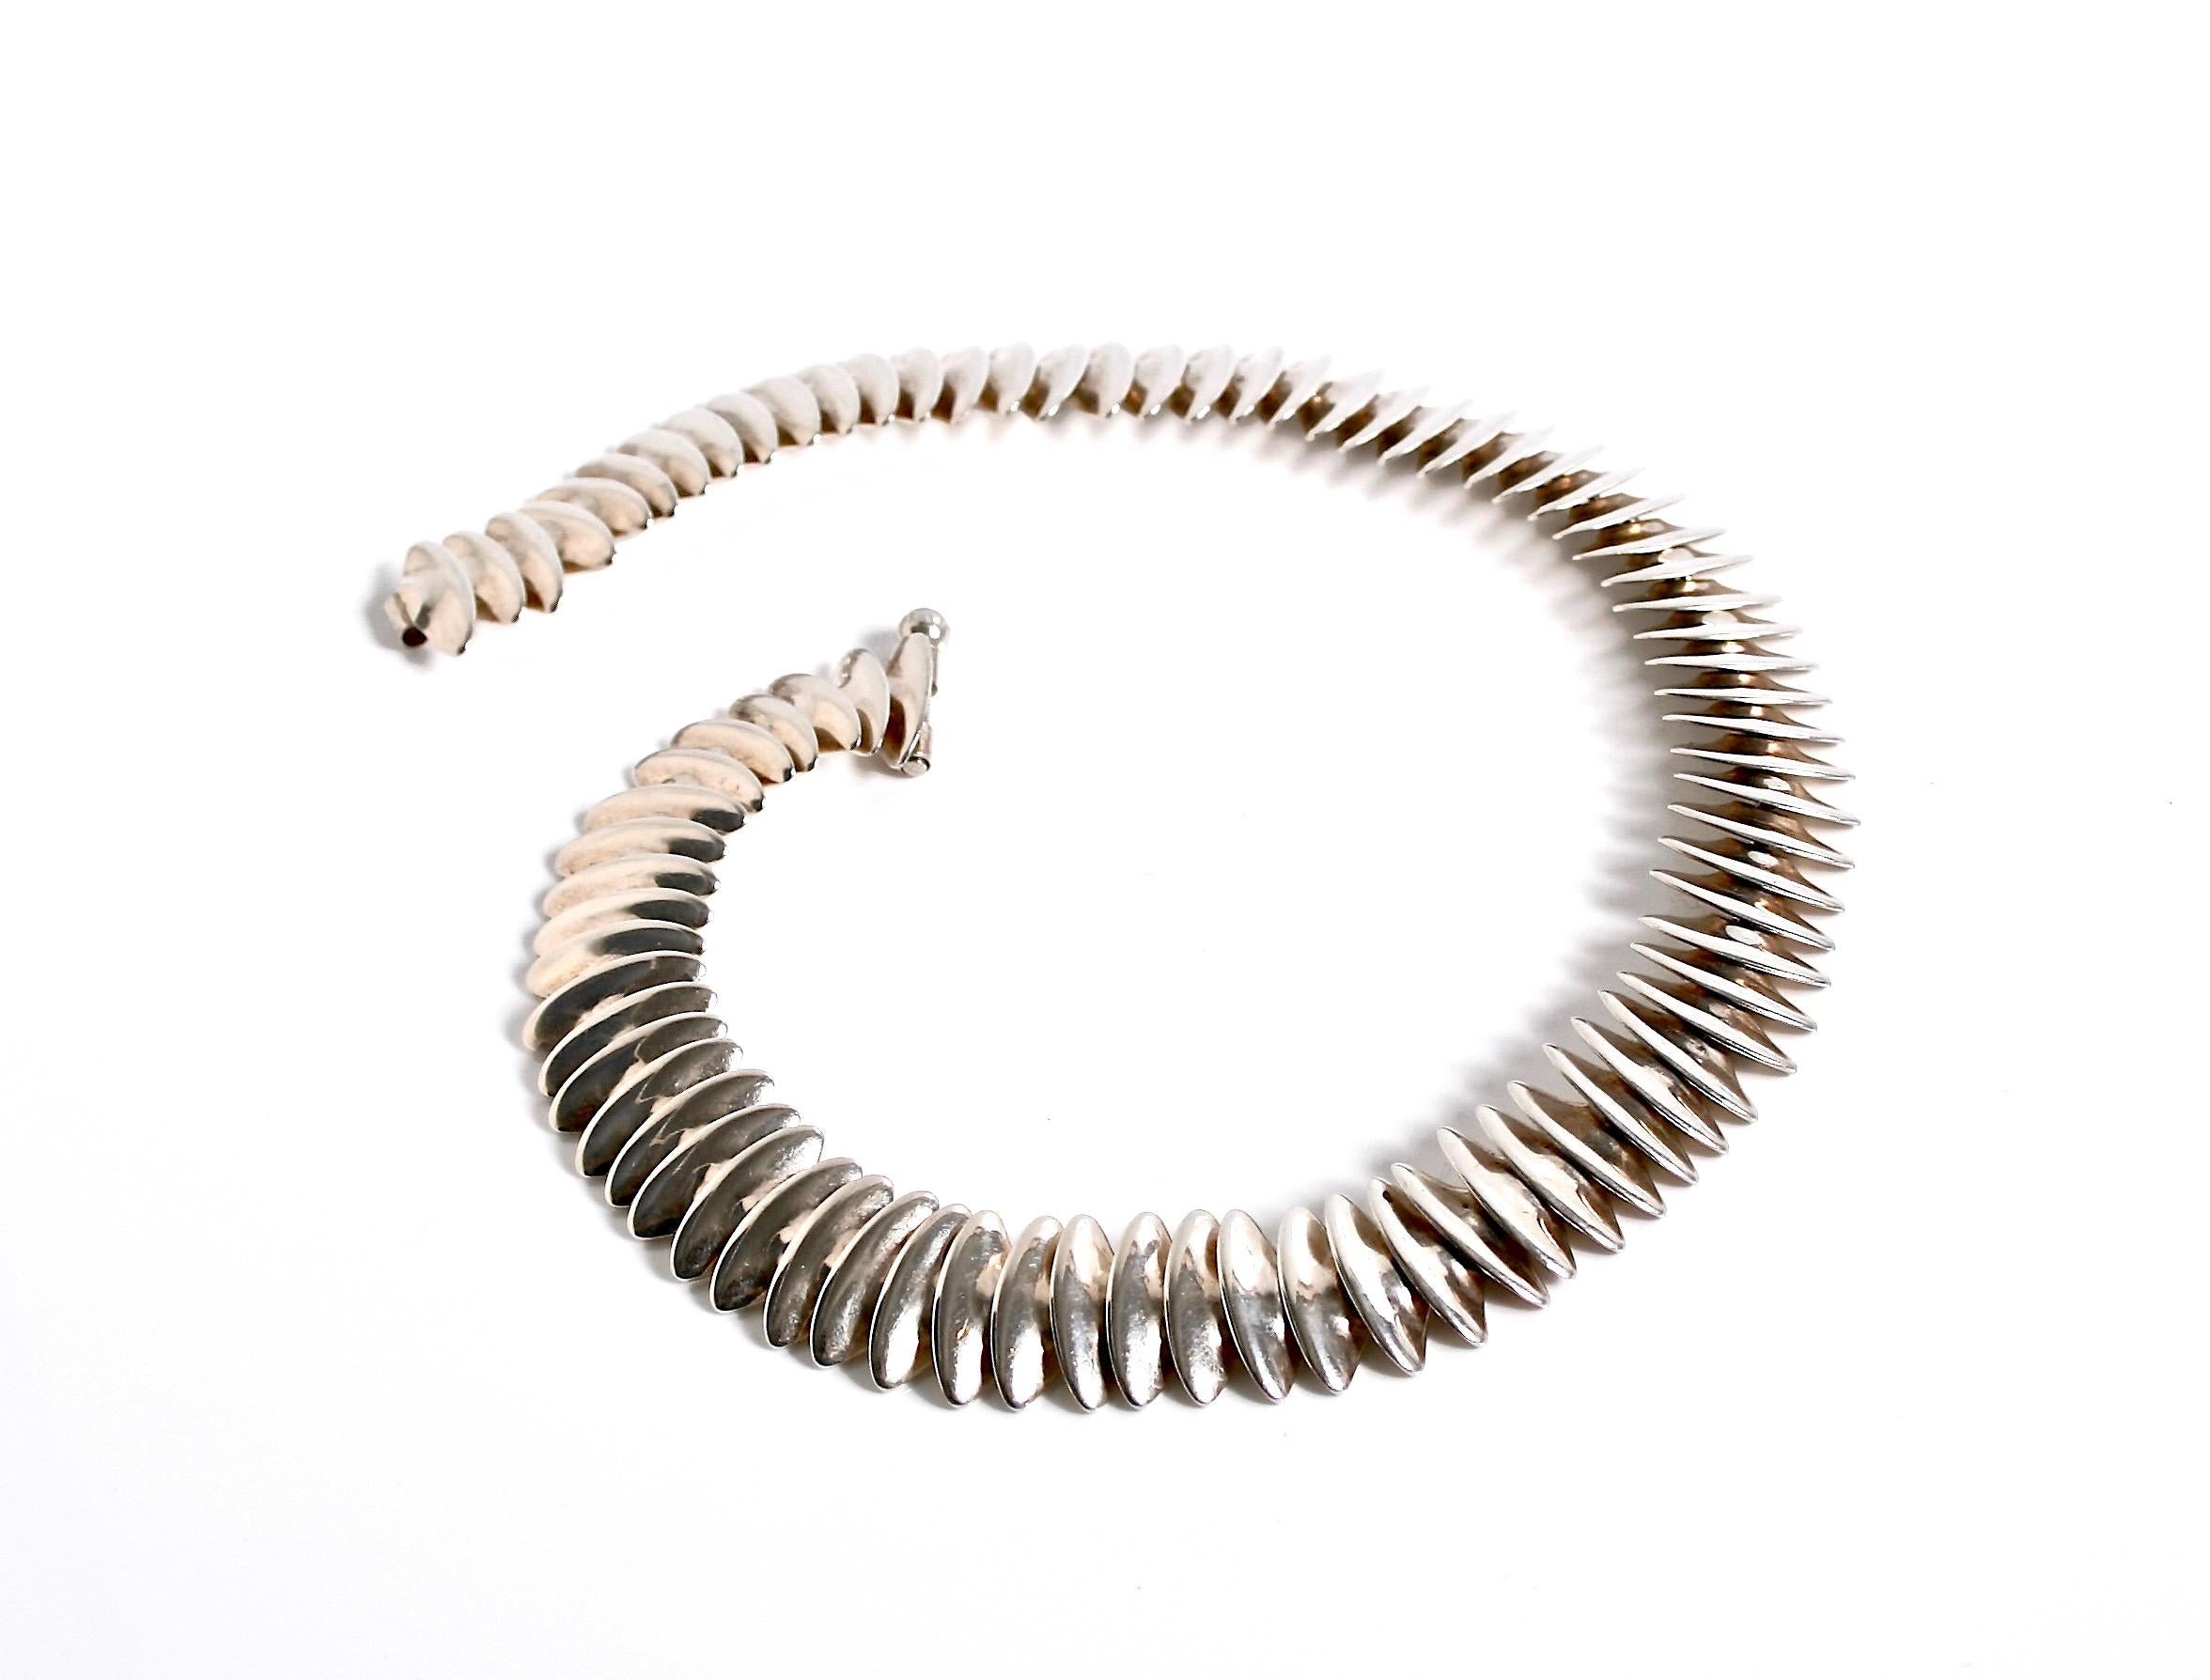 Sterling silver necklace designed by Bent Gabrielsen for Hans Hansen Denmark c.1960
Beautiful movement when worn
Design no 313 screw clasp
Matching bracelet available
